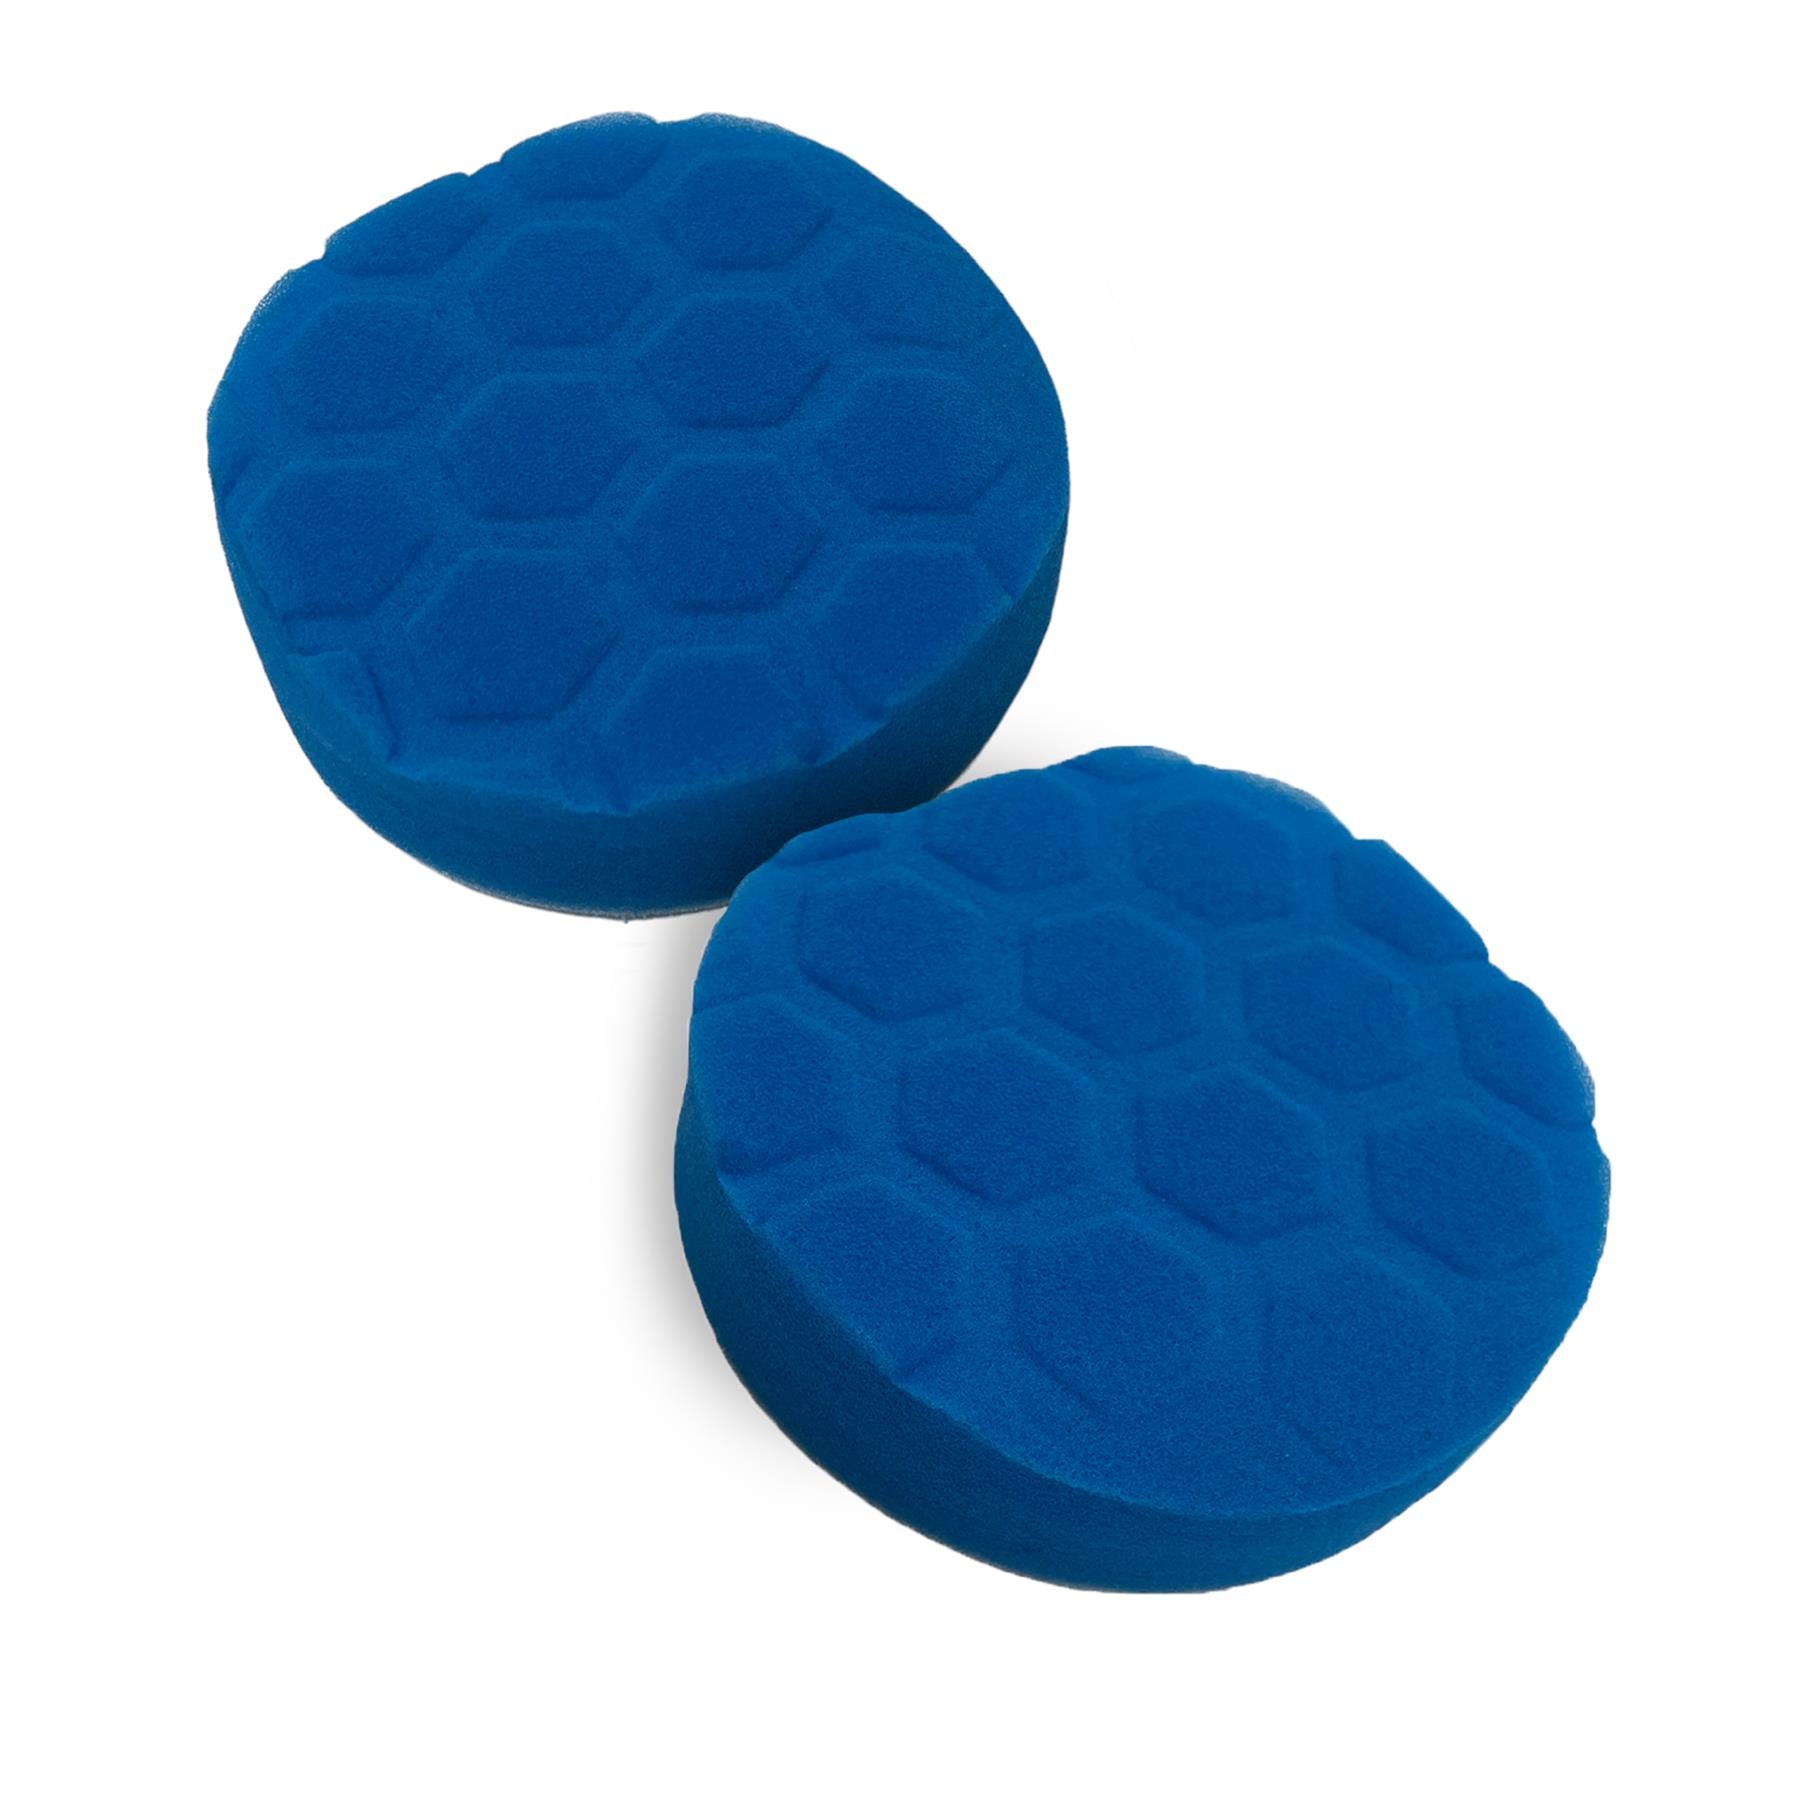 Replacement Sponge Heads for Scrub Master - Pack of 2